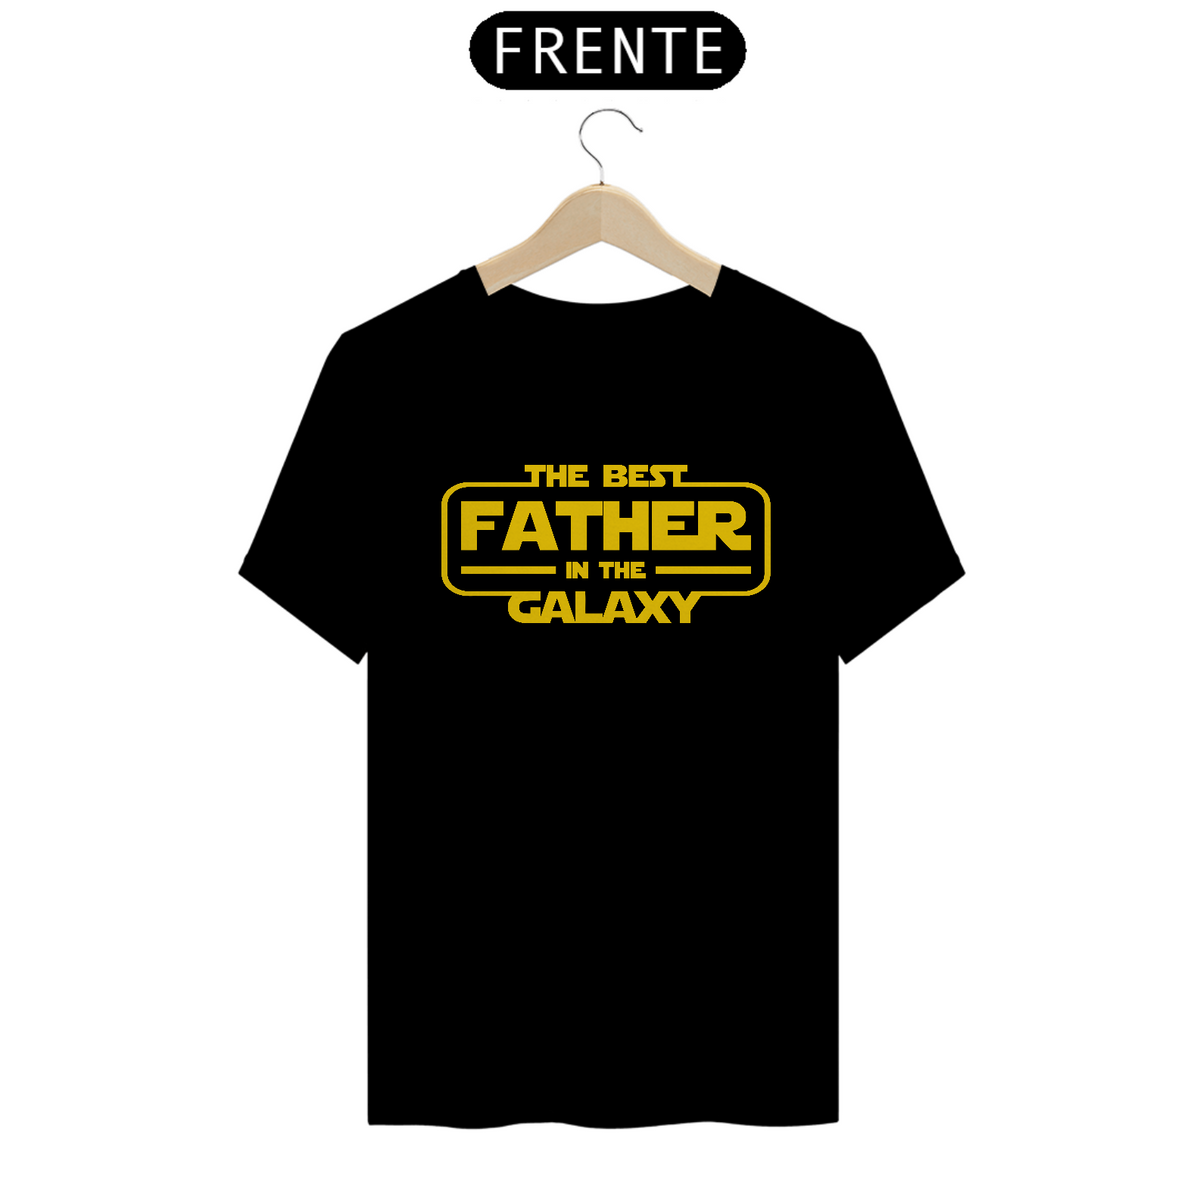 Nome do produto: Camiseta Geek The Best Father in Galaxy